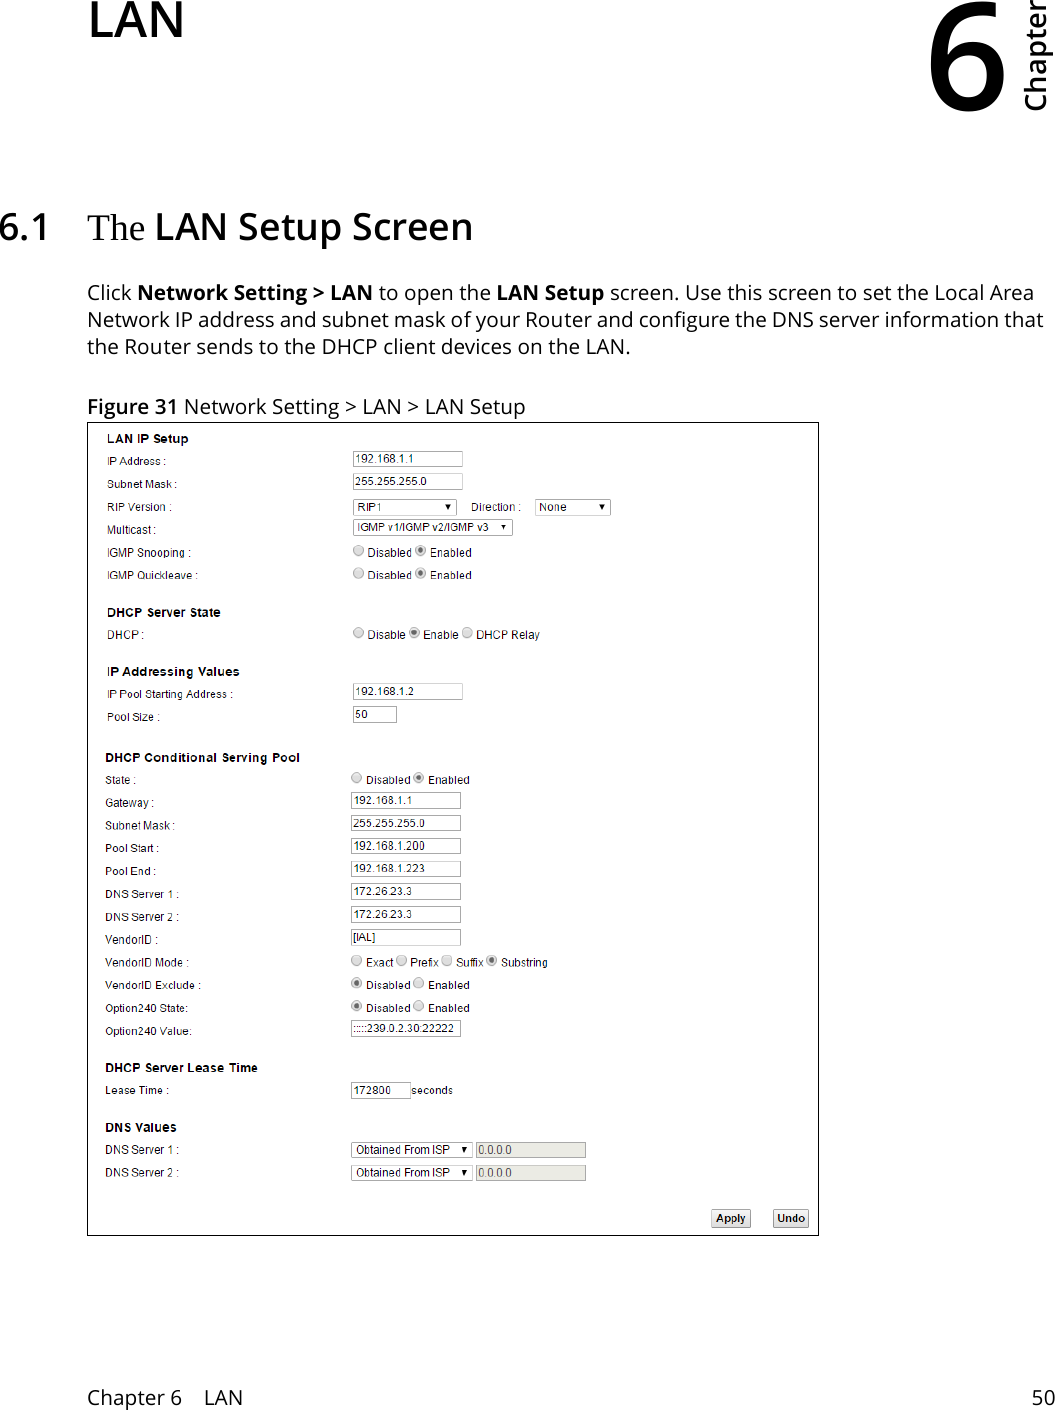 6Chapter Chapter 6    LAN 50CHAPTER 6 Chapter 6 LAN6.1   The LAN Setup ScreenClick Network Setting &gt; LAN to open the LAN Setup screen. Use this screen to set the Local Area Network IP address and subnet mask of your Router and configure the DNS server information that the Router sends to the DHCP client devices on the LAN.Figure 31 Network Setting &gt; LAN &gt; LAN Setup 